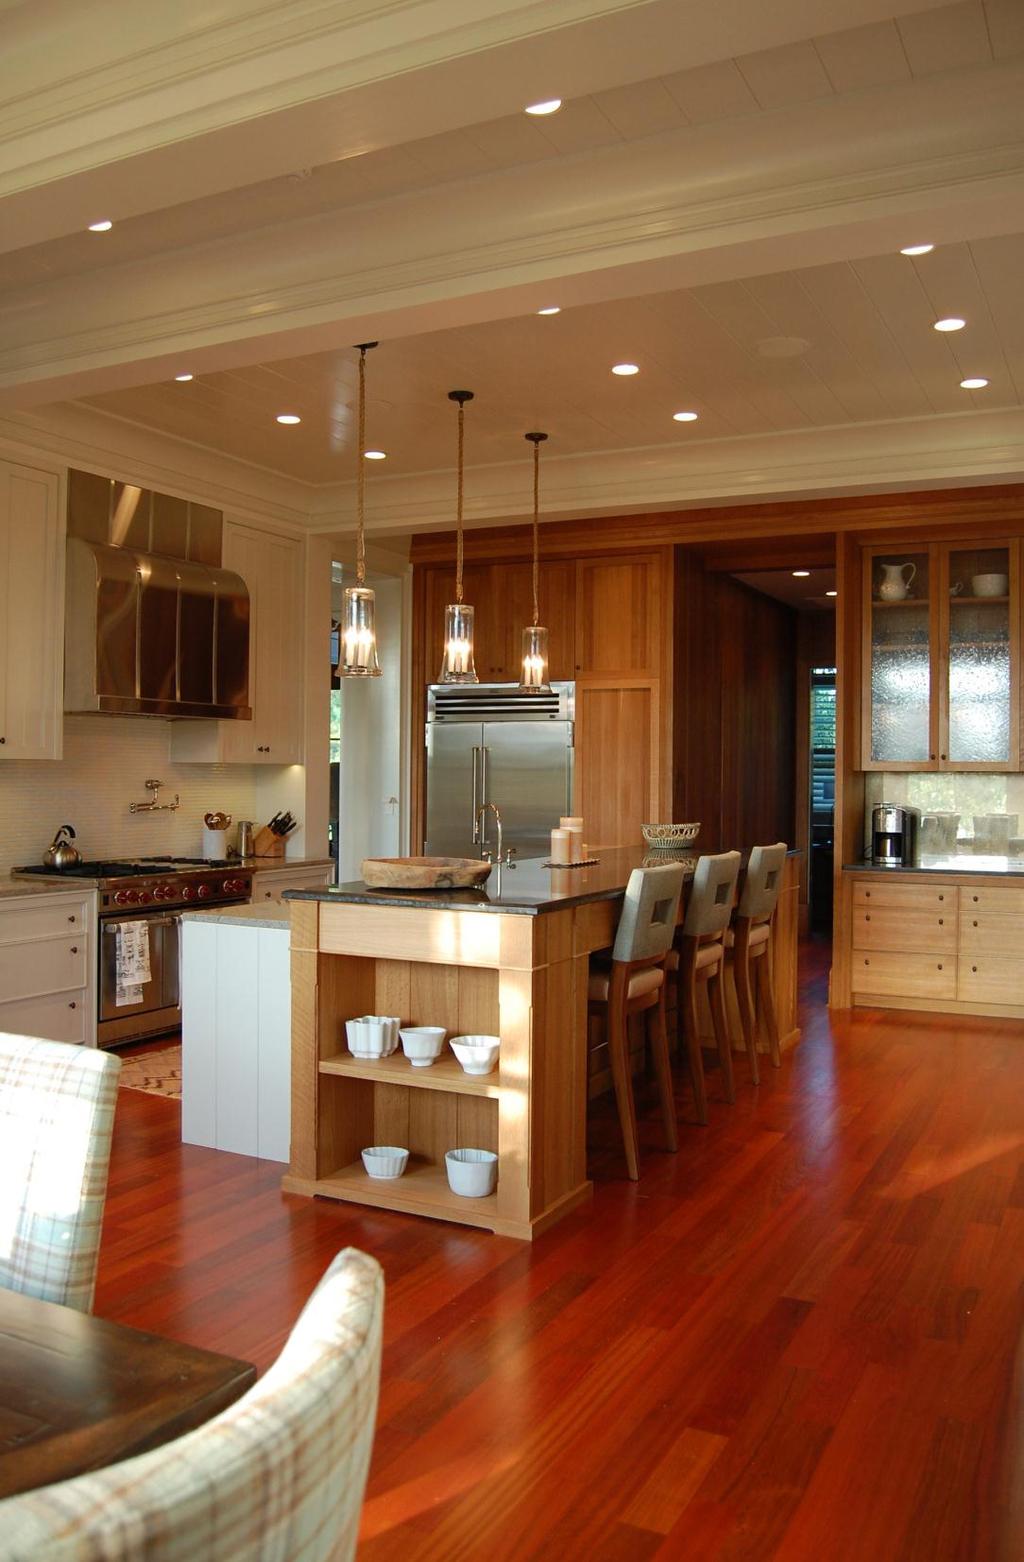 The Kitchen is a mix of painted cabinetry and rift white oak.